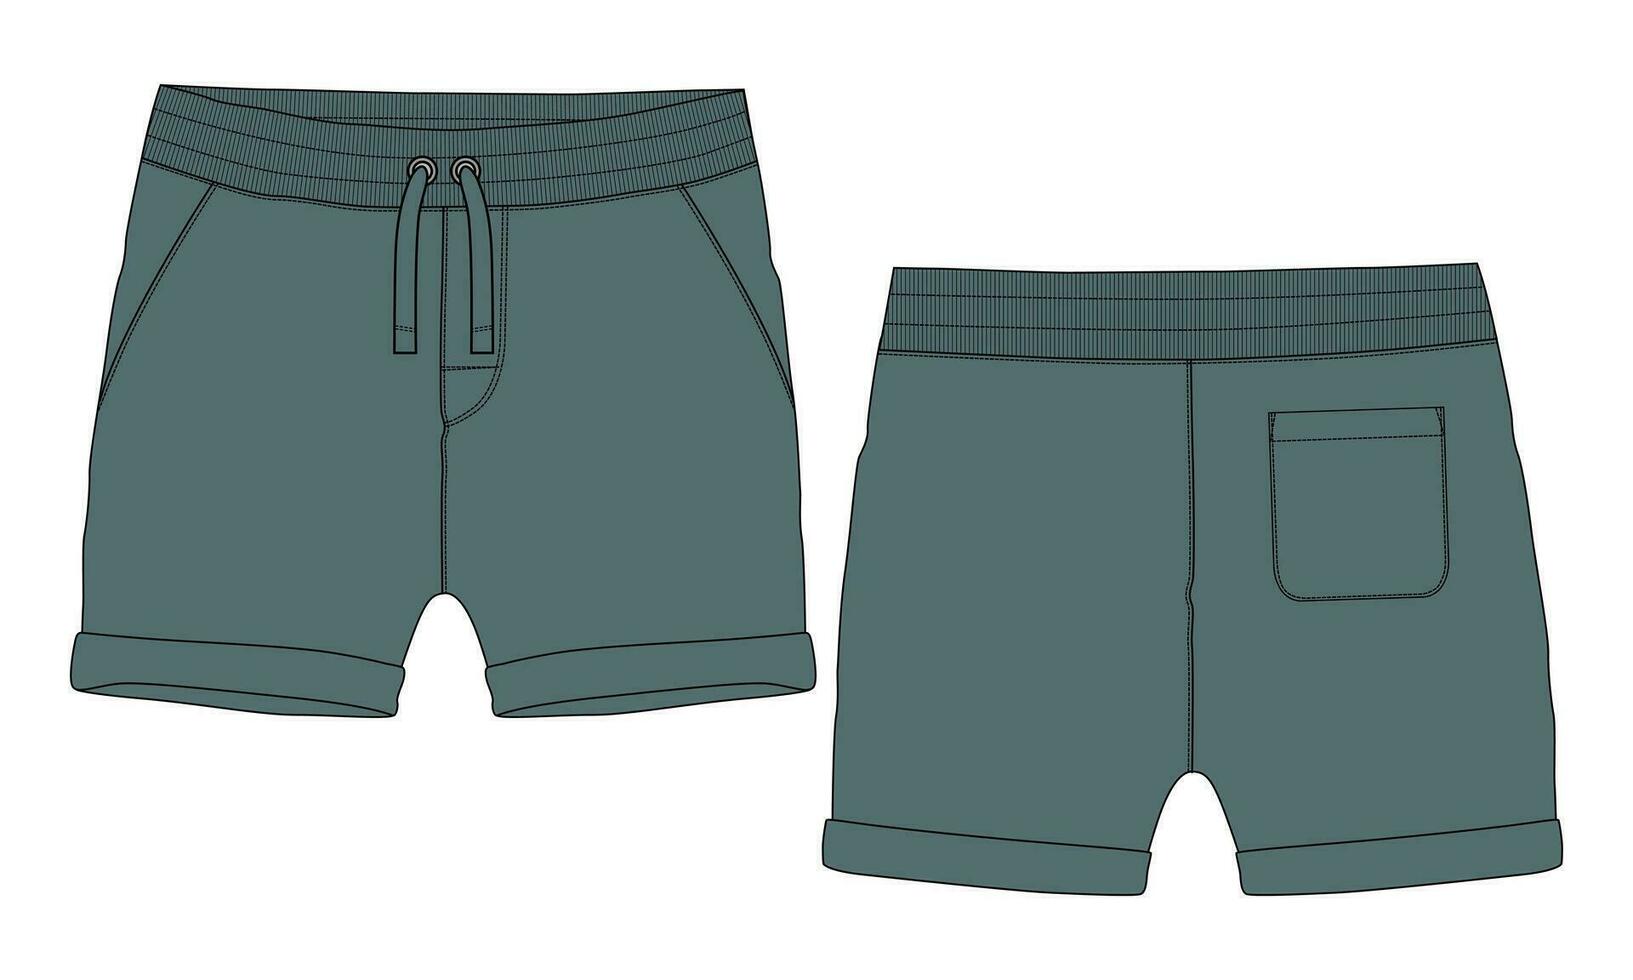 Sweat shorts pant vector illustration template front and back views